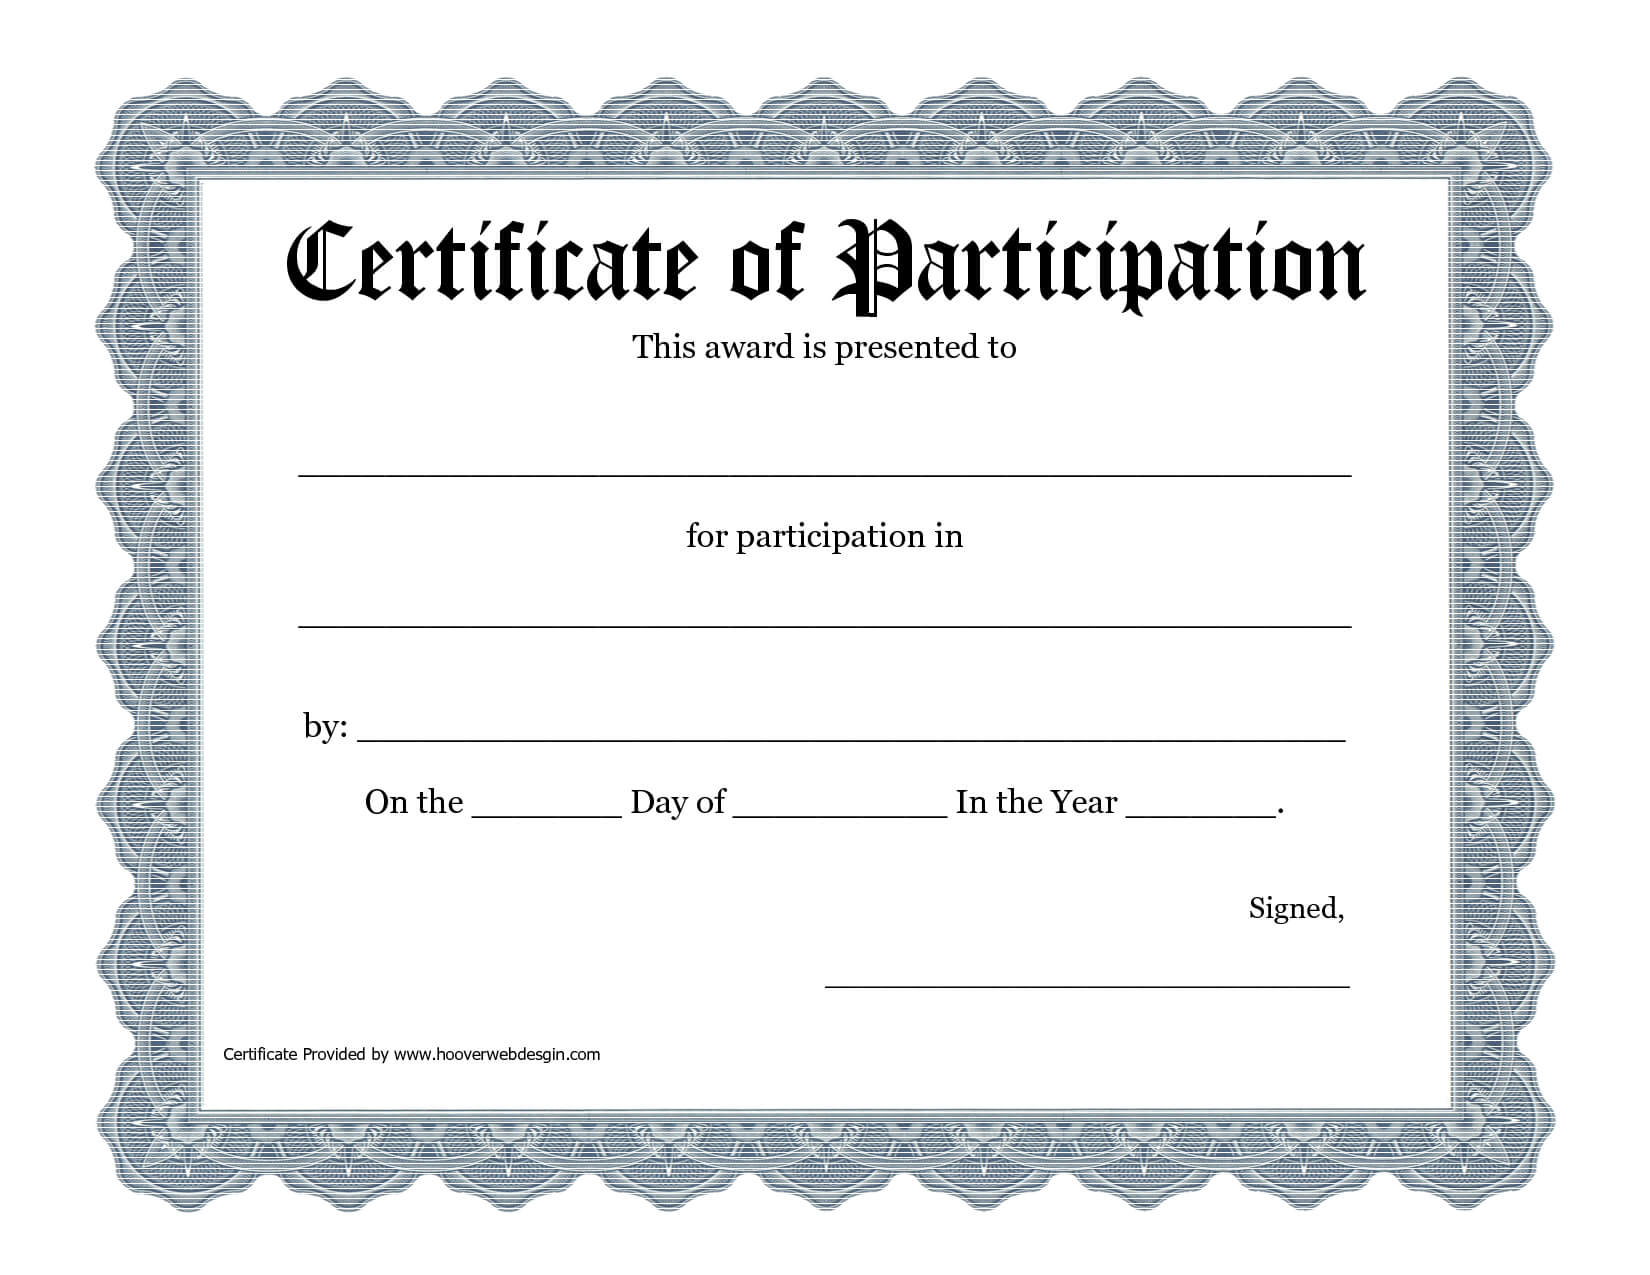 Certificate Of Participation Template Filename | Elsik Blue With Regard To Certificate Of Participation Template Ppt